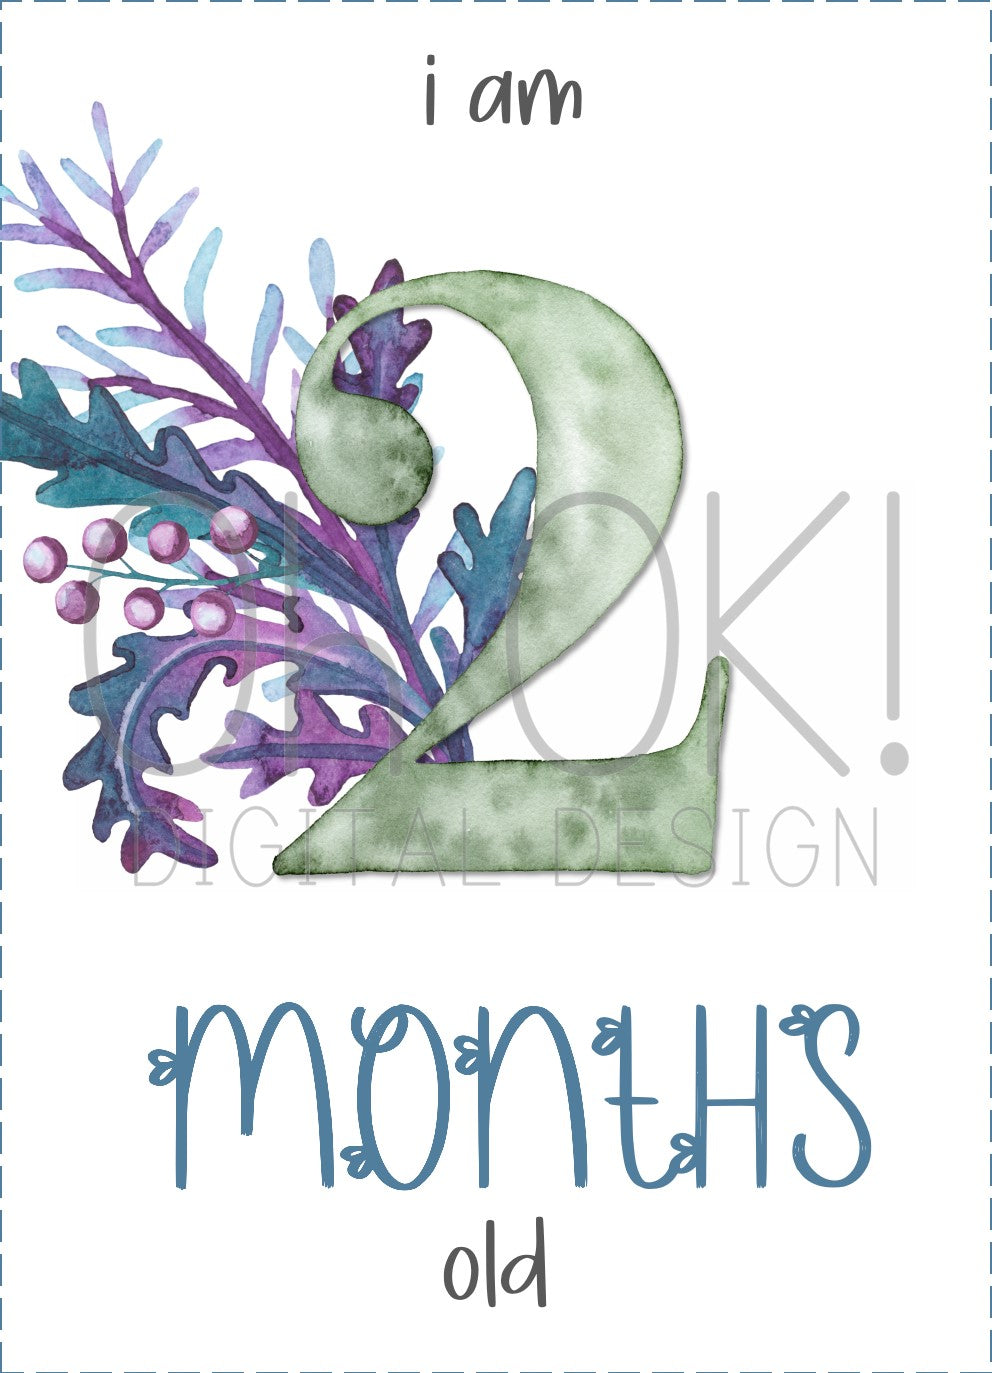 READY TO PRINT:  Baby Milestone Cards - Leafy Green